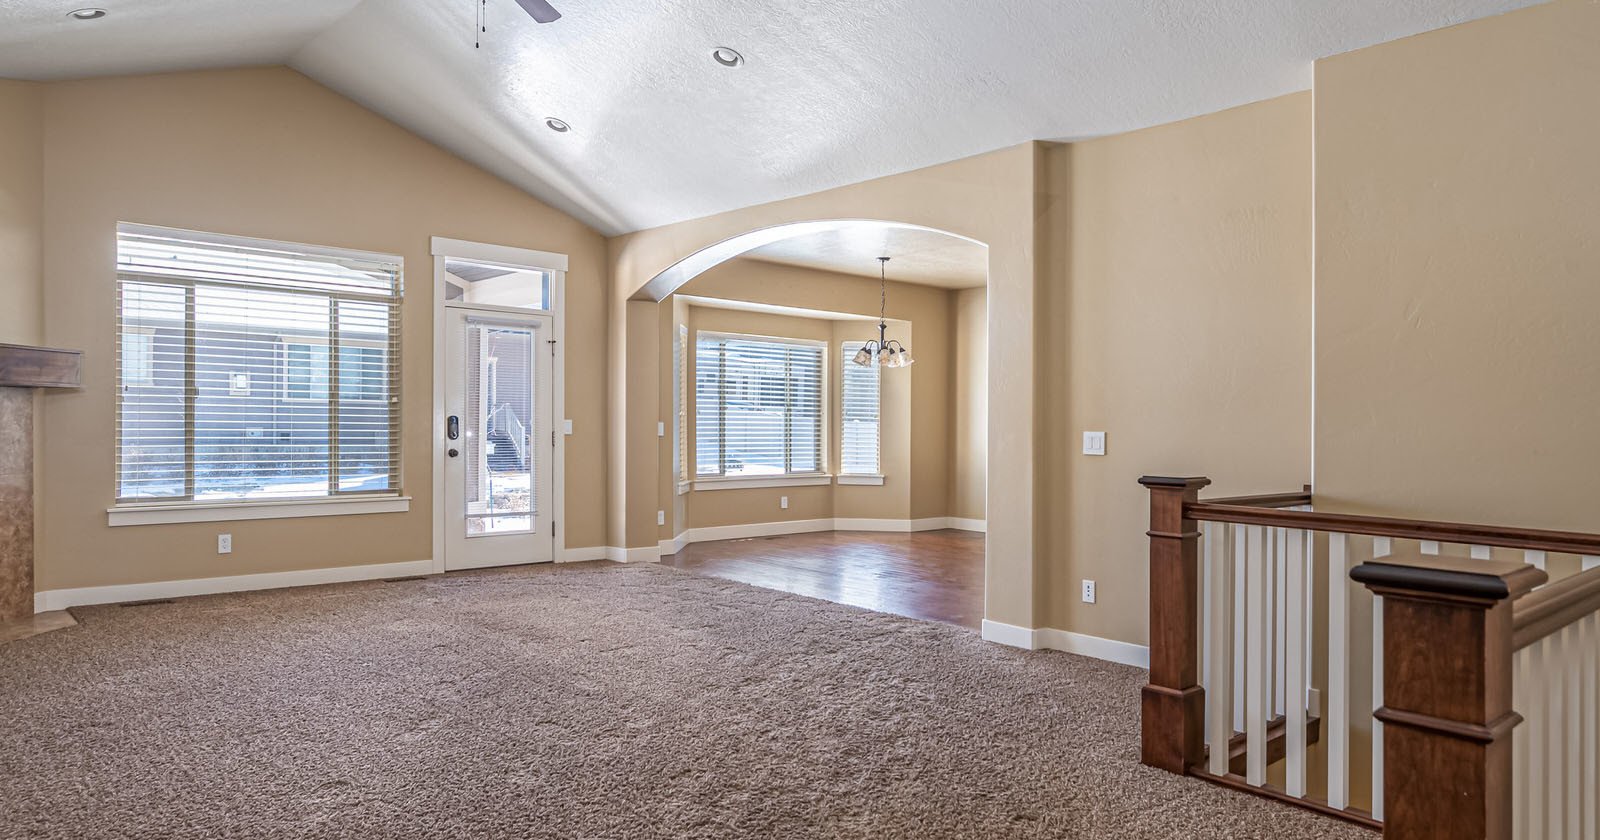 How to Shoot Real Estate Photos with HDR and Flash, From Start to Finish